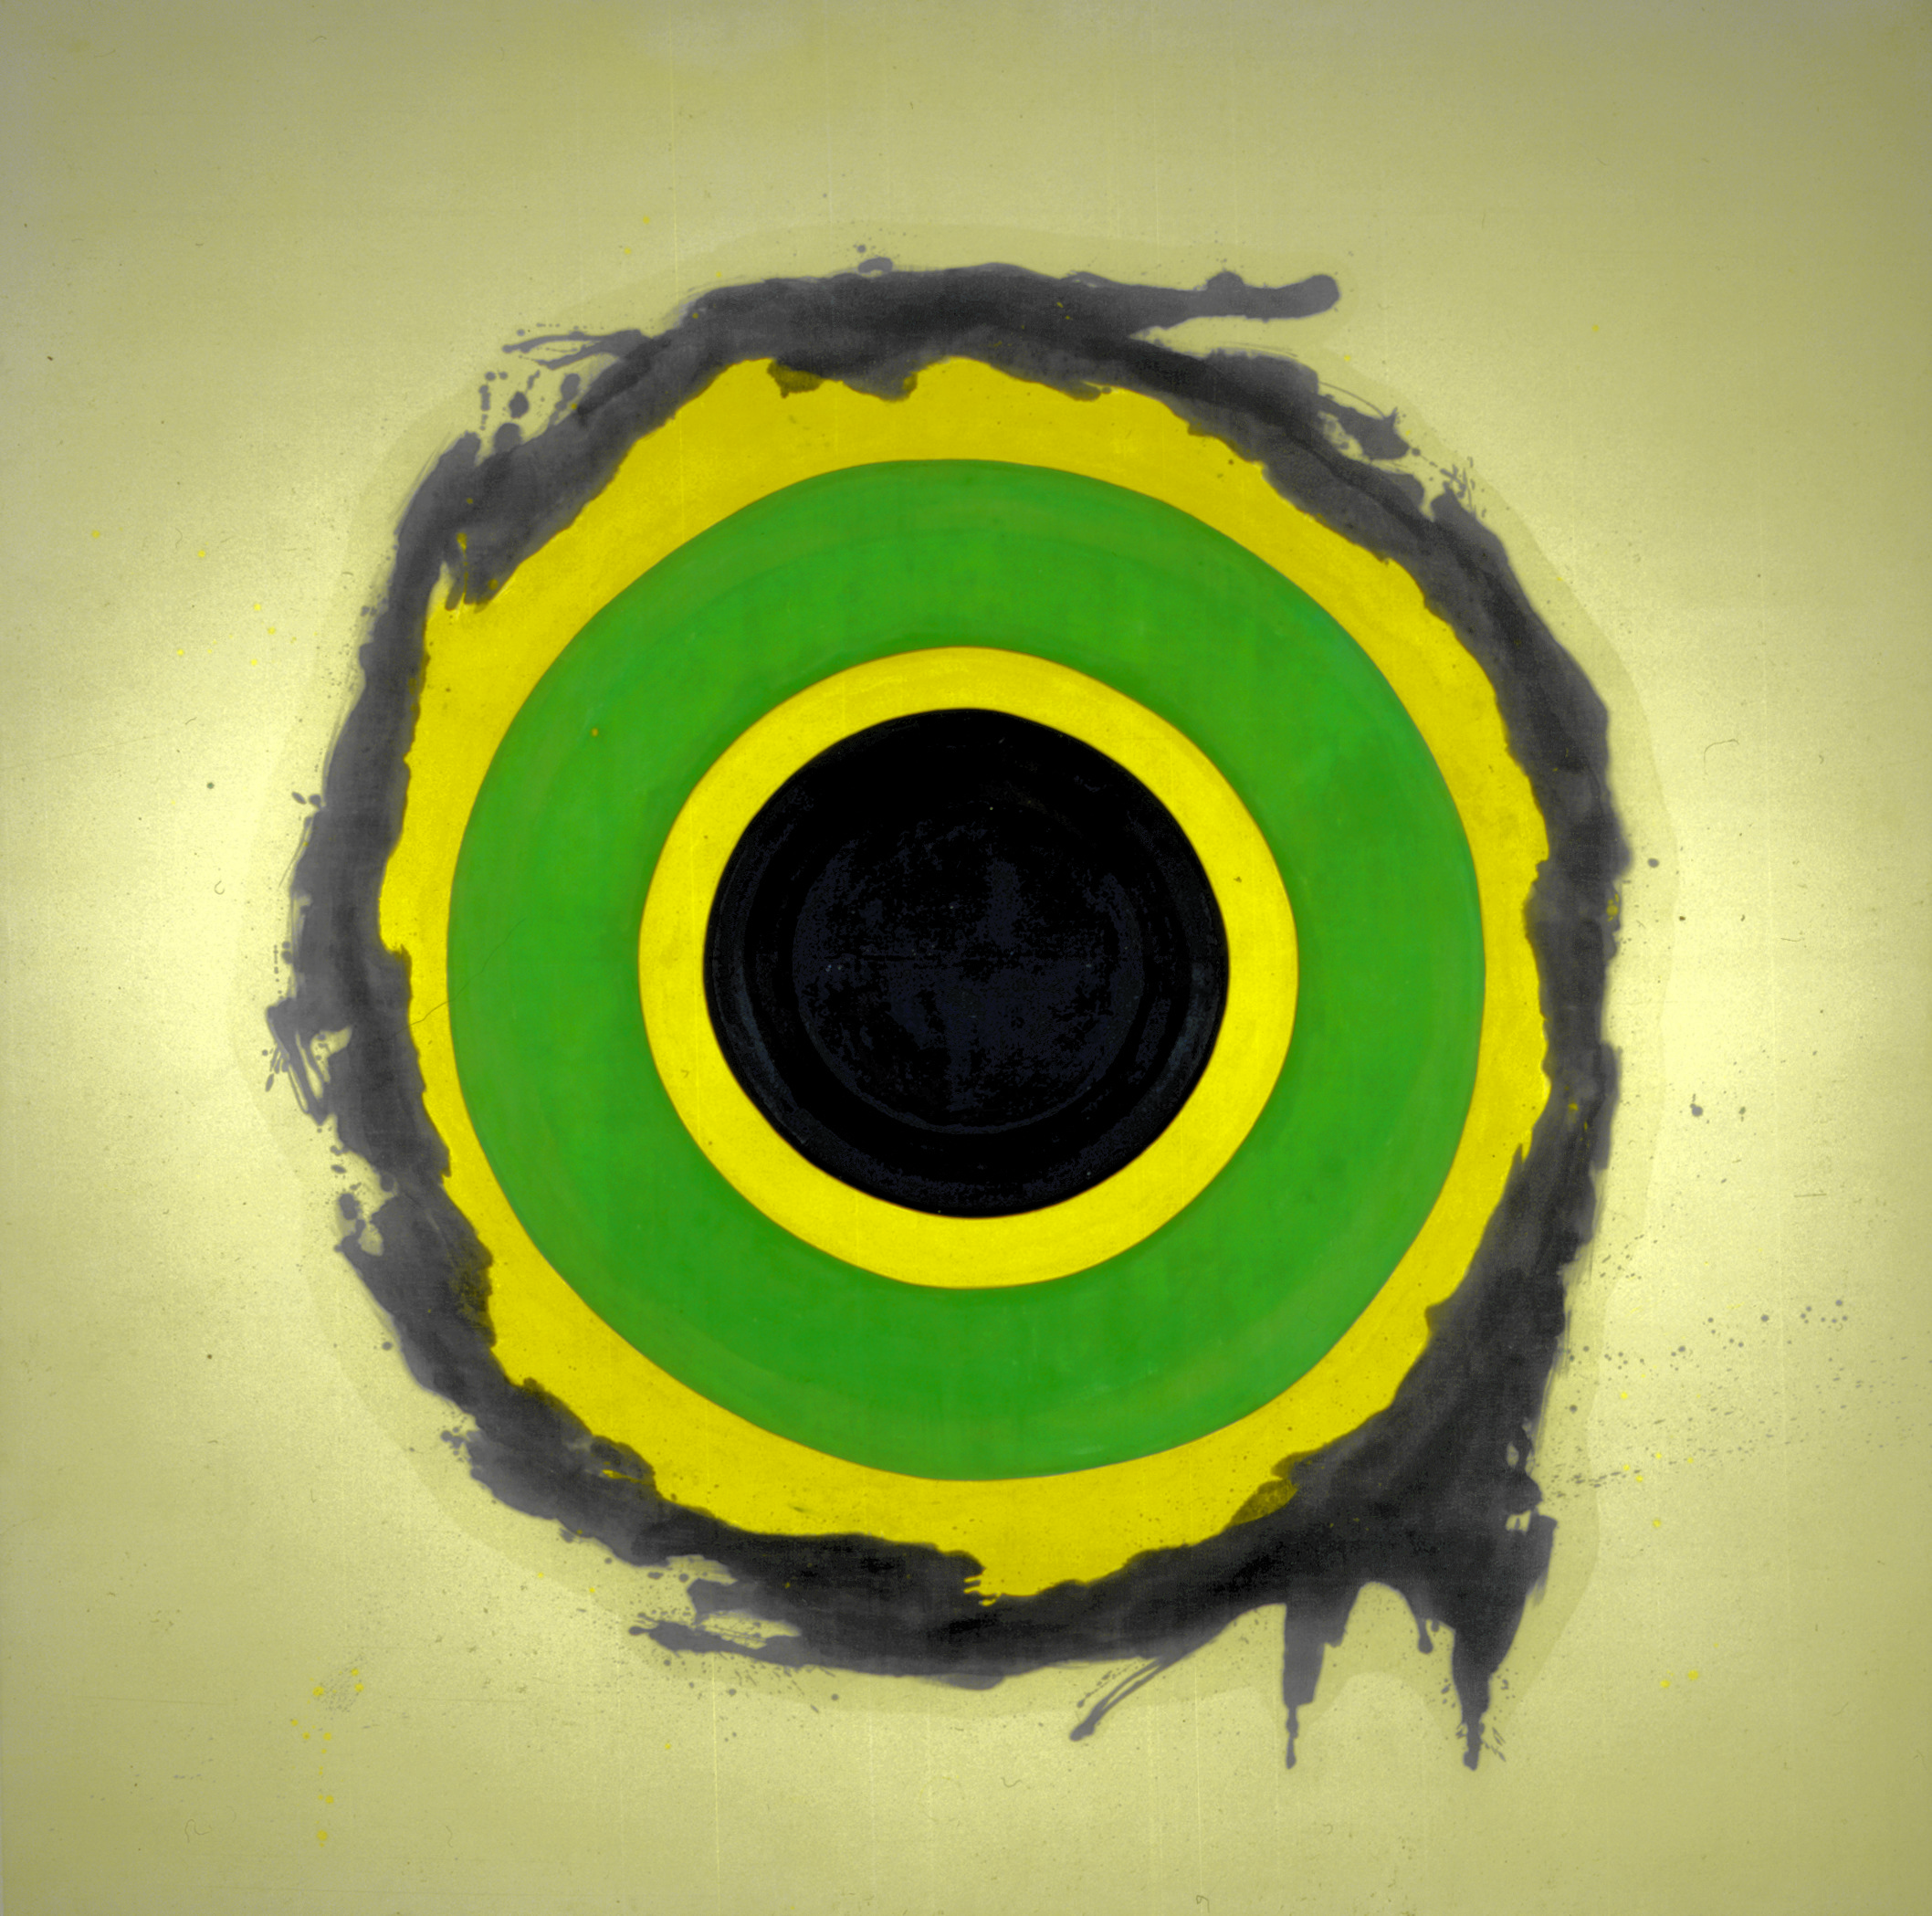 Kenneth Noland, ‘Spread,’ 1958. Oil on canvas, 117 by 117in. (297.2 by 297.2cm). Grey Art Gallery, New York University Art Collection, New York, NY. Gift of William S. Rubin (1964.20). © The Kenneth Noland Foundation / Licensed by VAGA at Artists Rights Society (ARS), NY 